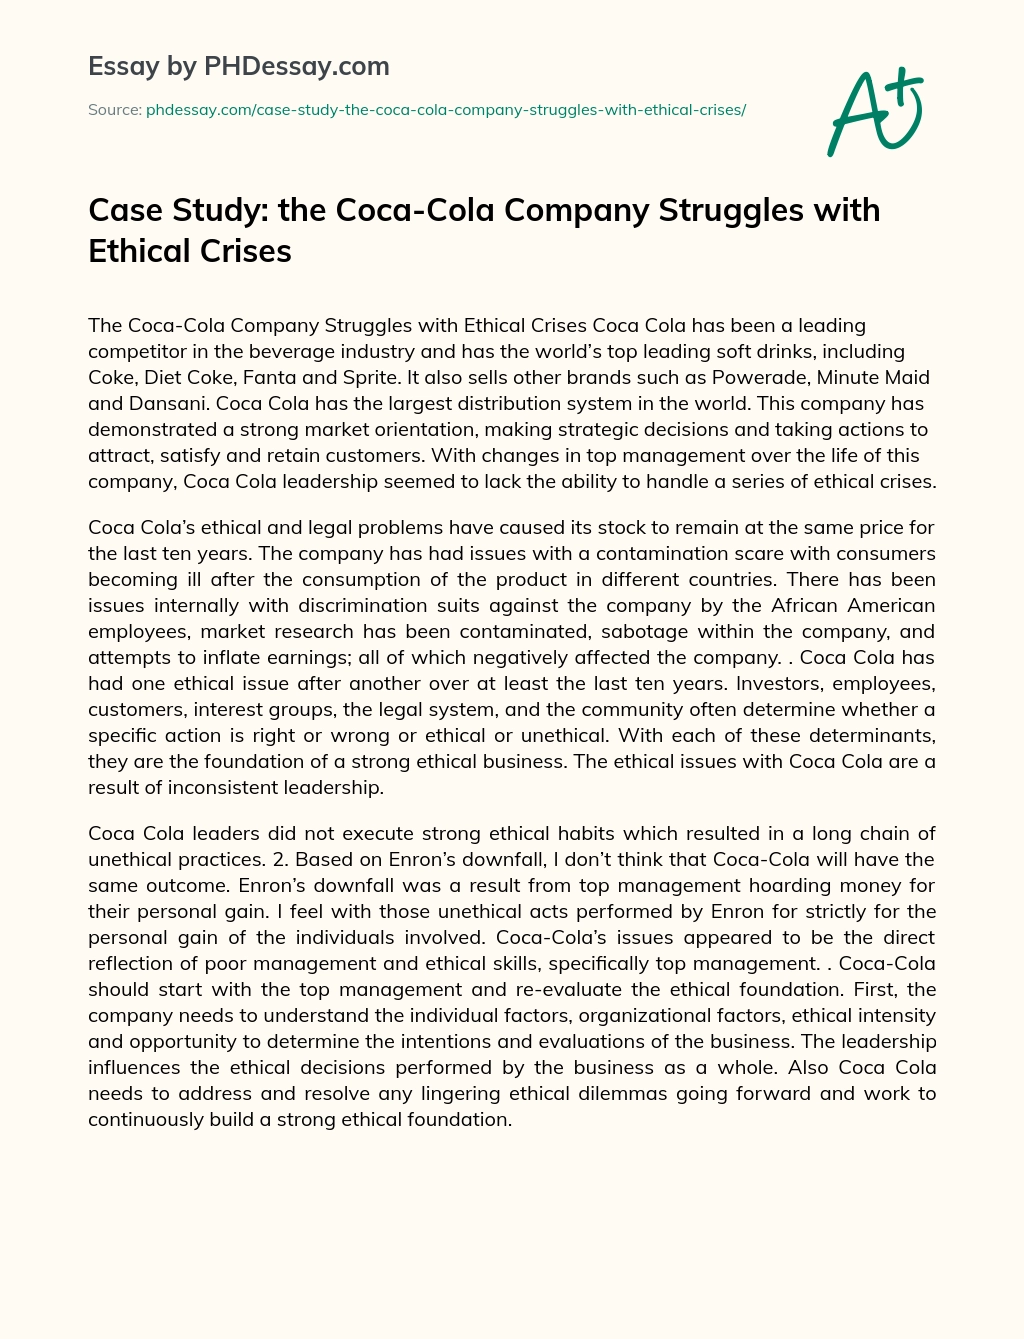 ethical issues in coca cola case study